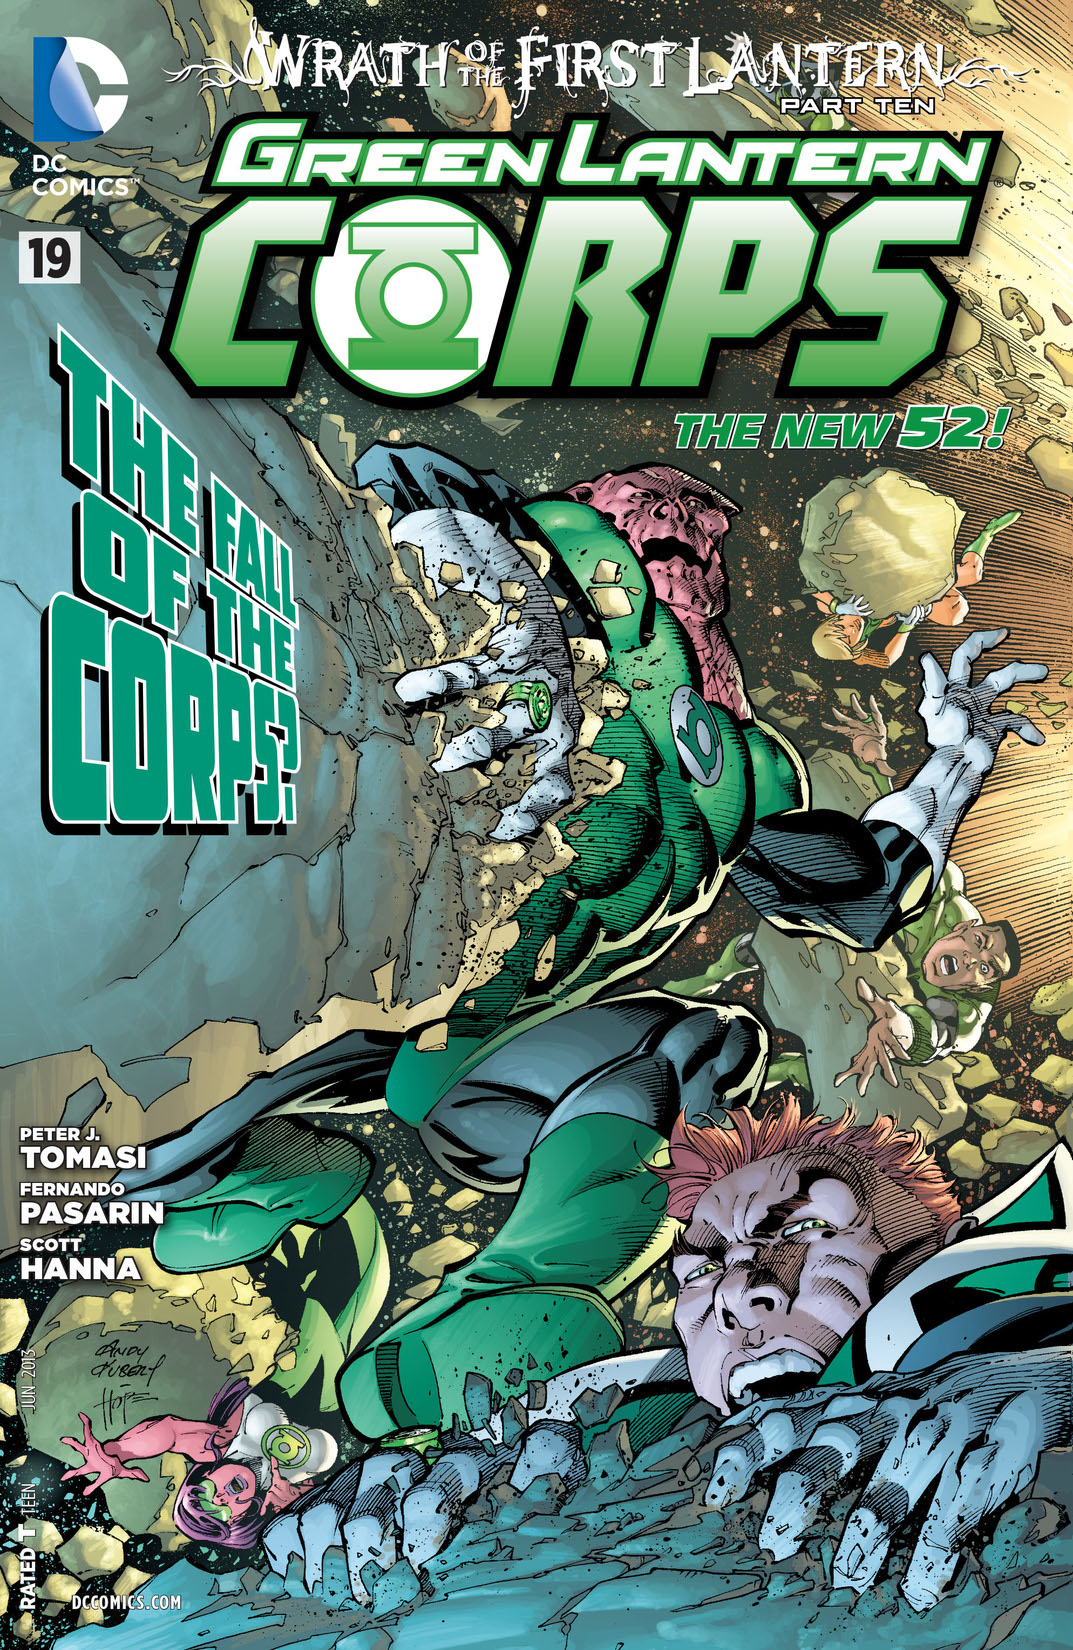 Green Lantern Corps (2011-) #19 preview images